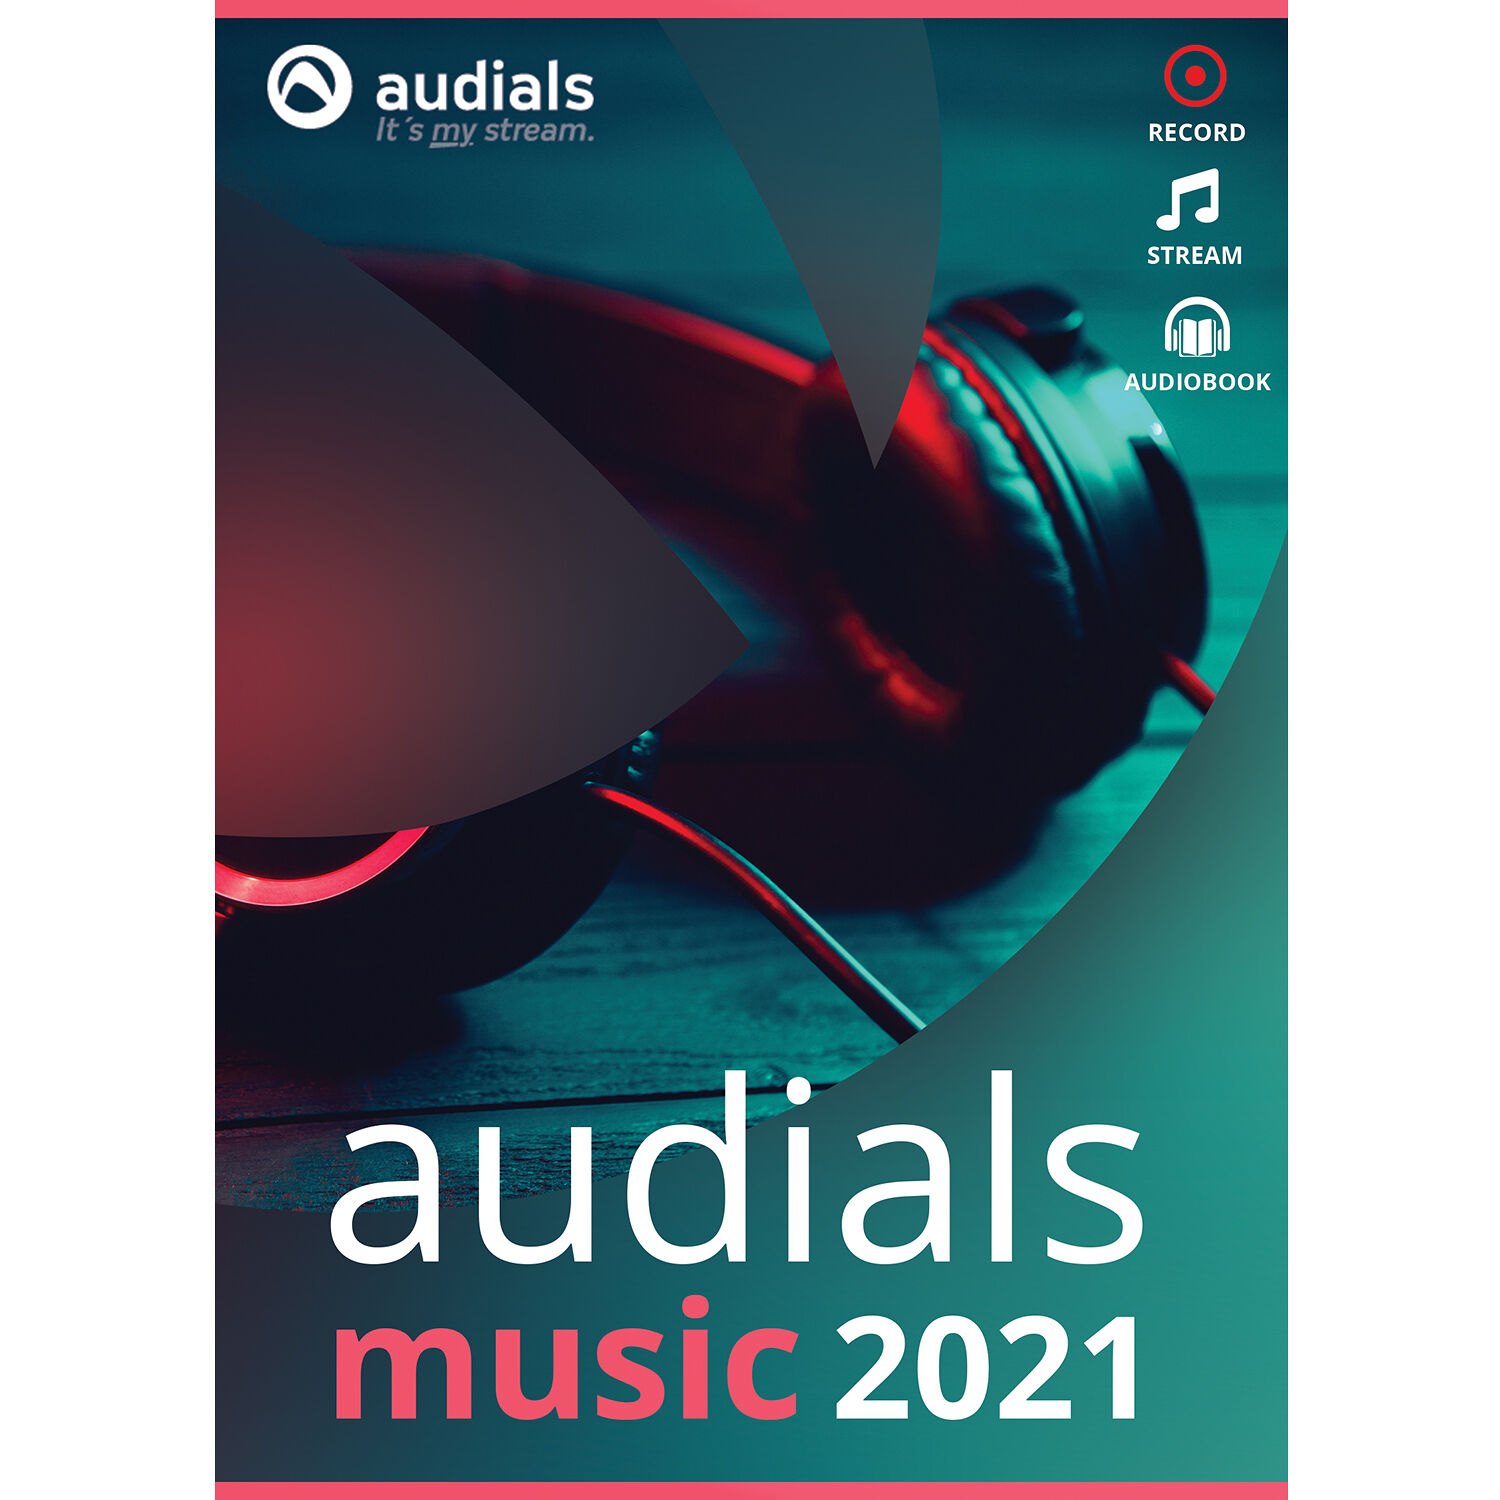 Benefit now from the super discount for Audials Music 2021, the powerful music streaming recorder.